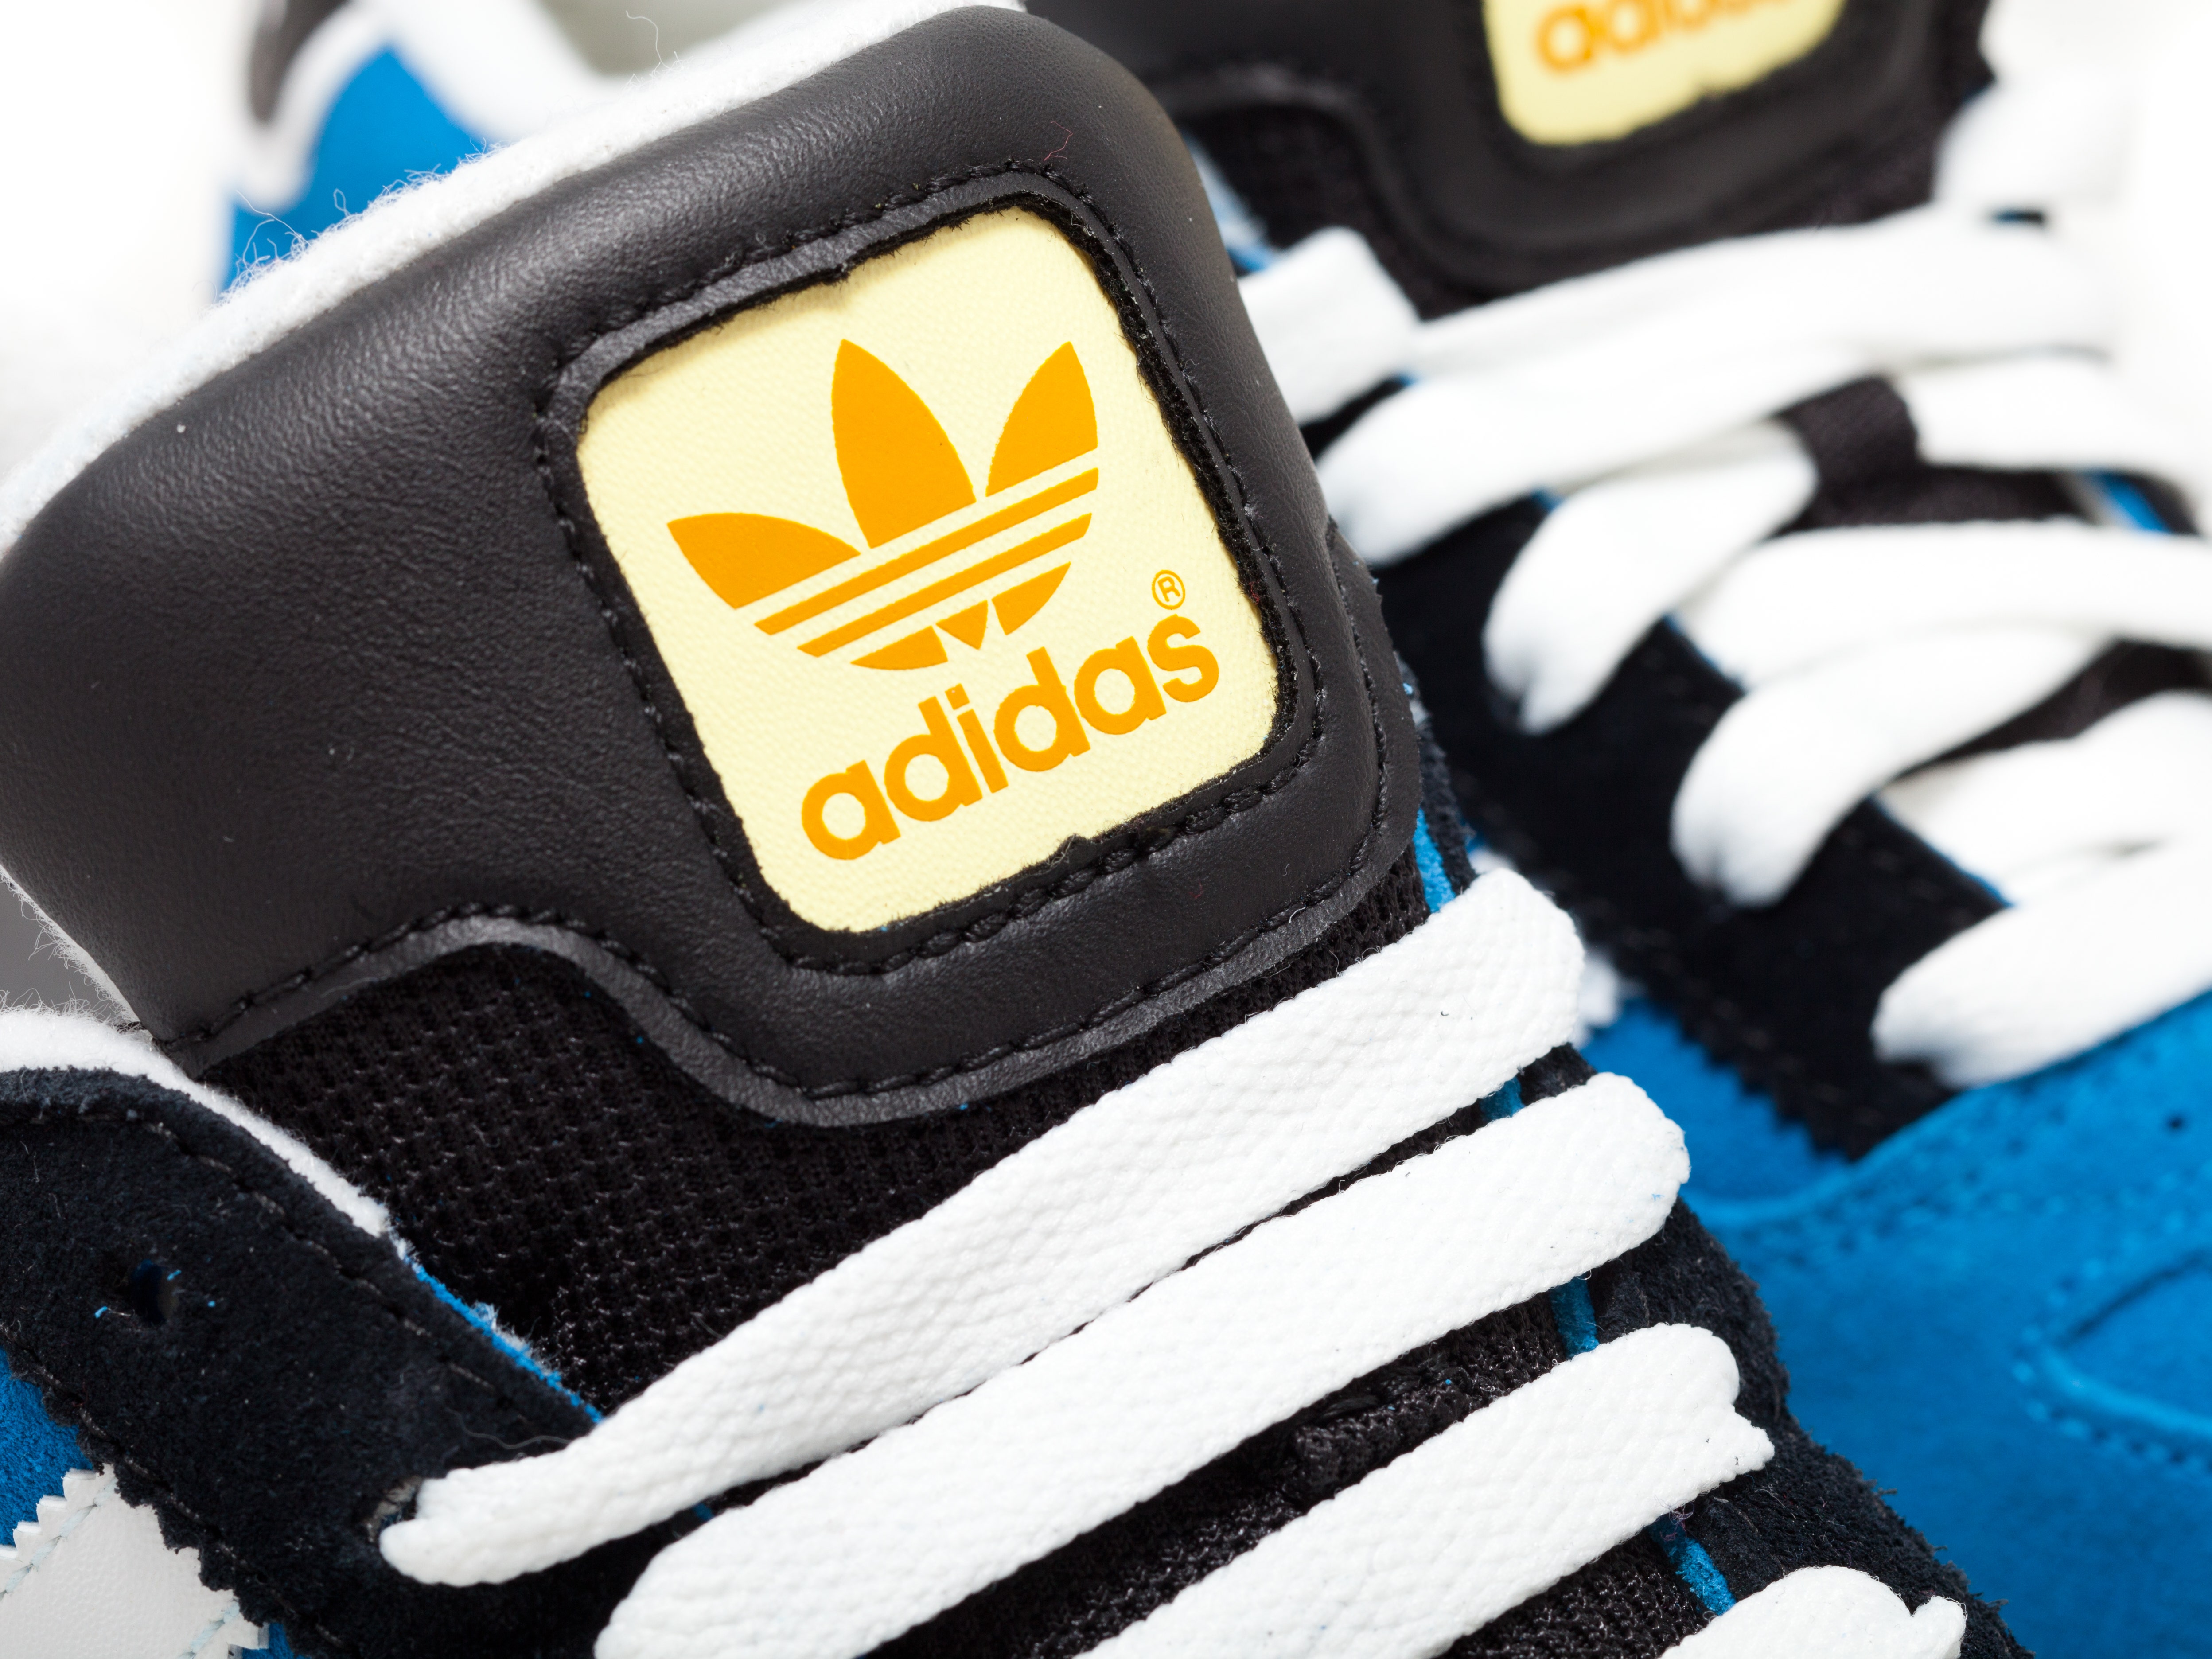 Adidas: Why Love The Shoes And The (OTCMKTS:ADDYY) | Seeking Alpha